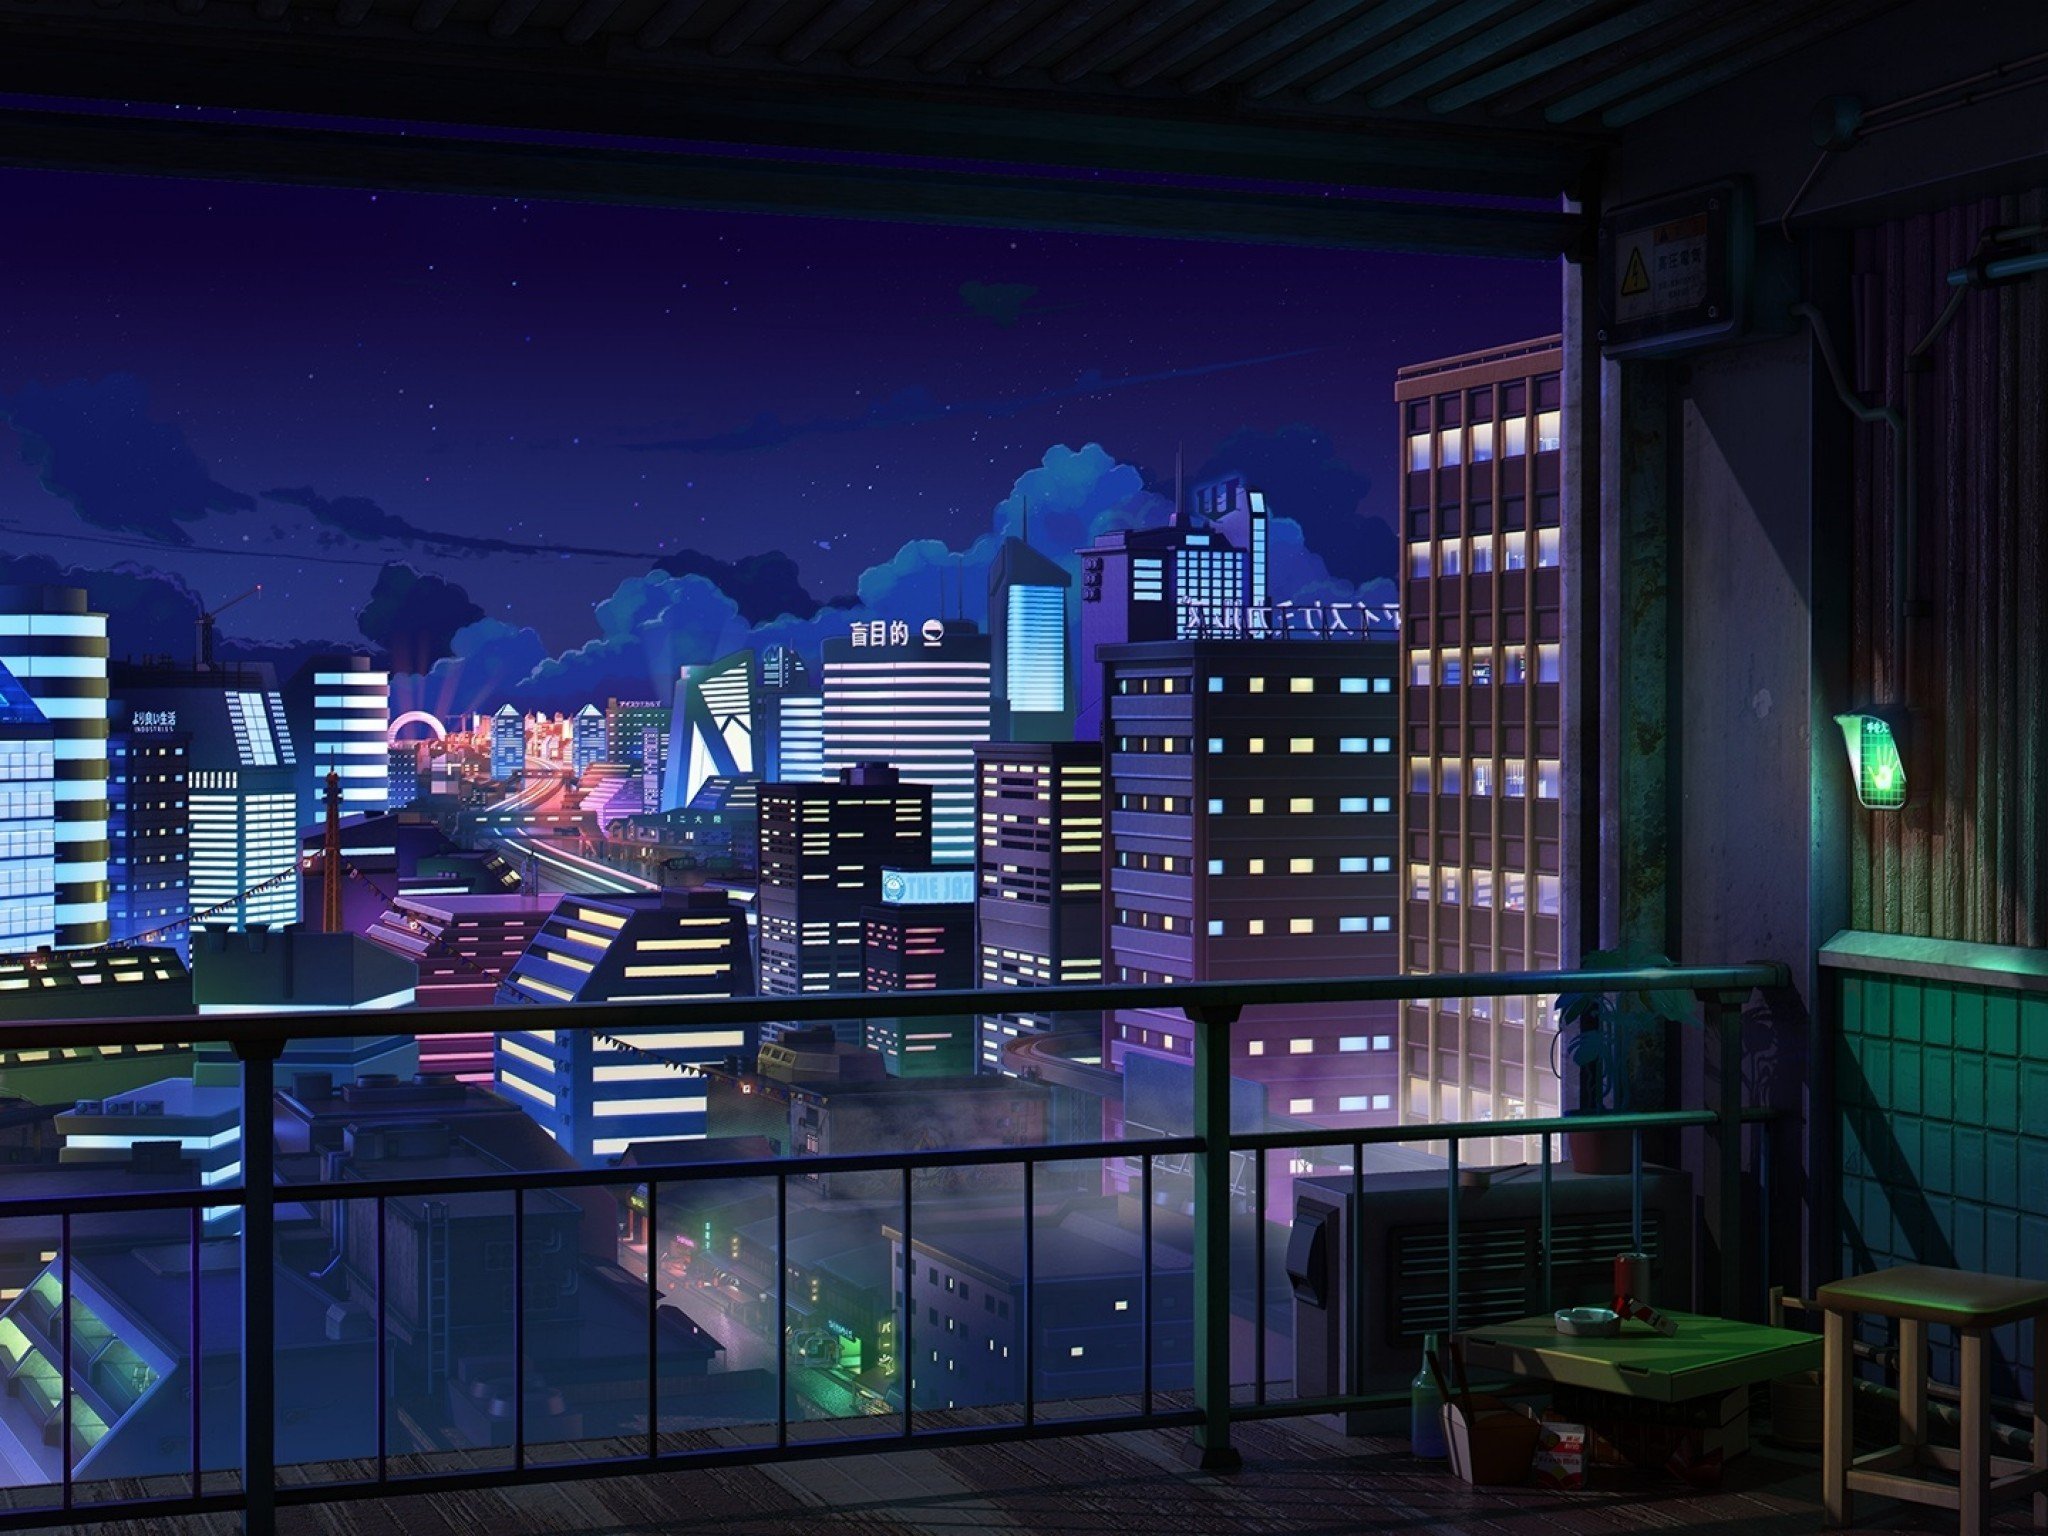 Balcony view  Other  Anime Background Wallpapers on Desktop Nexus Image  2241772